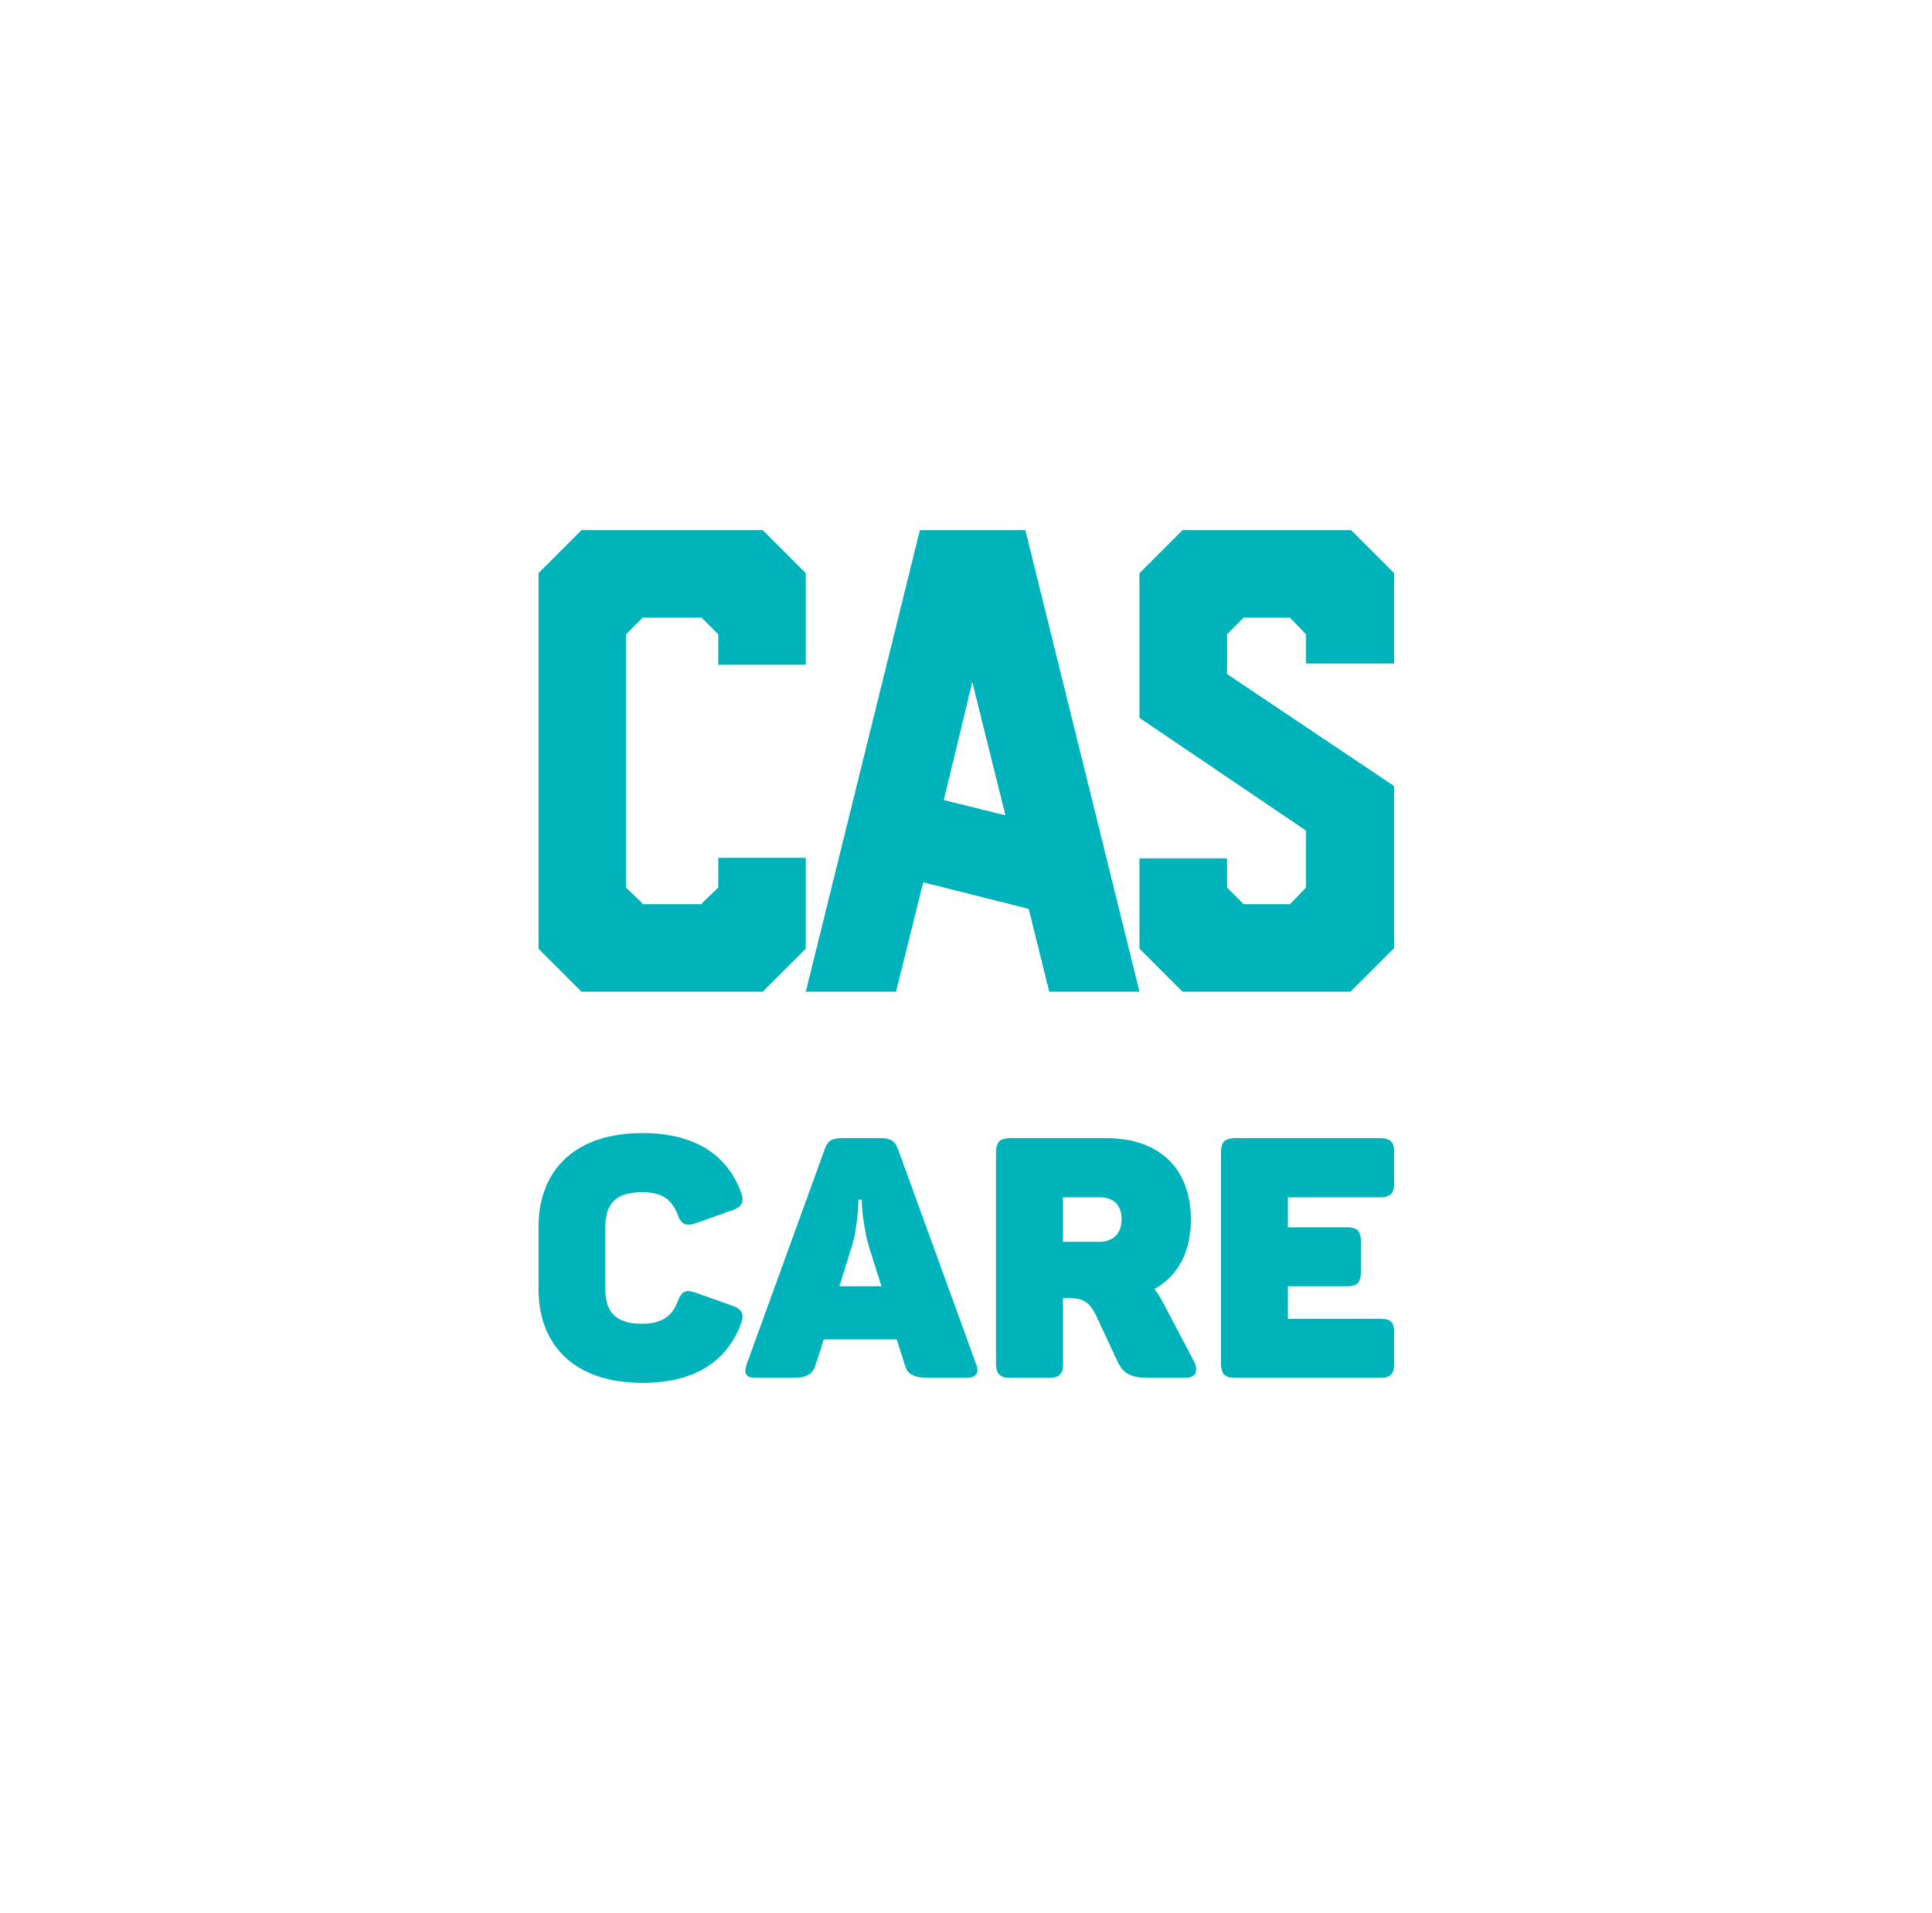 CAS-CARE_white.png